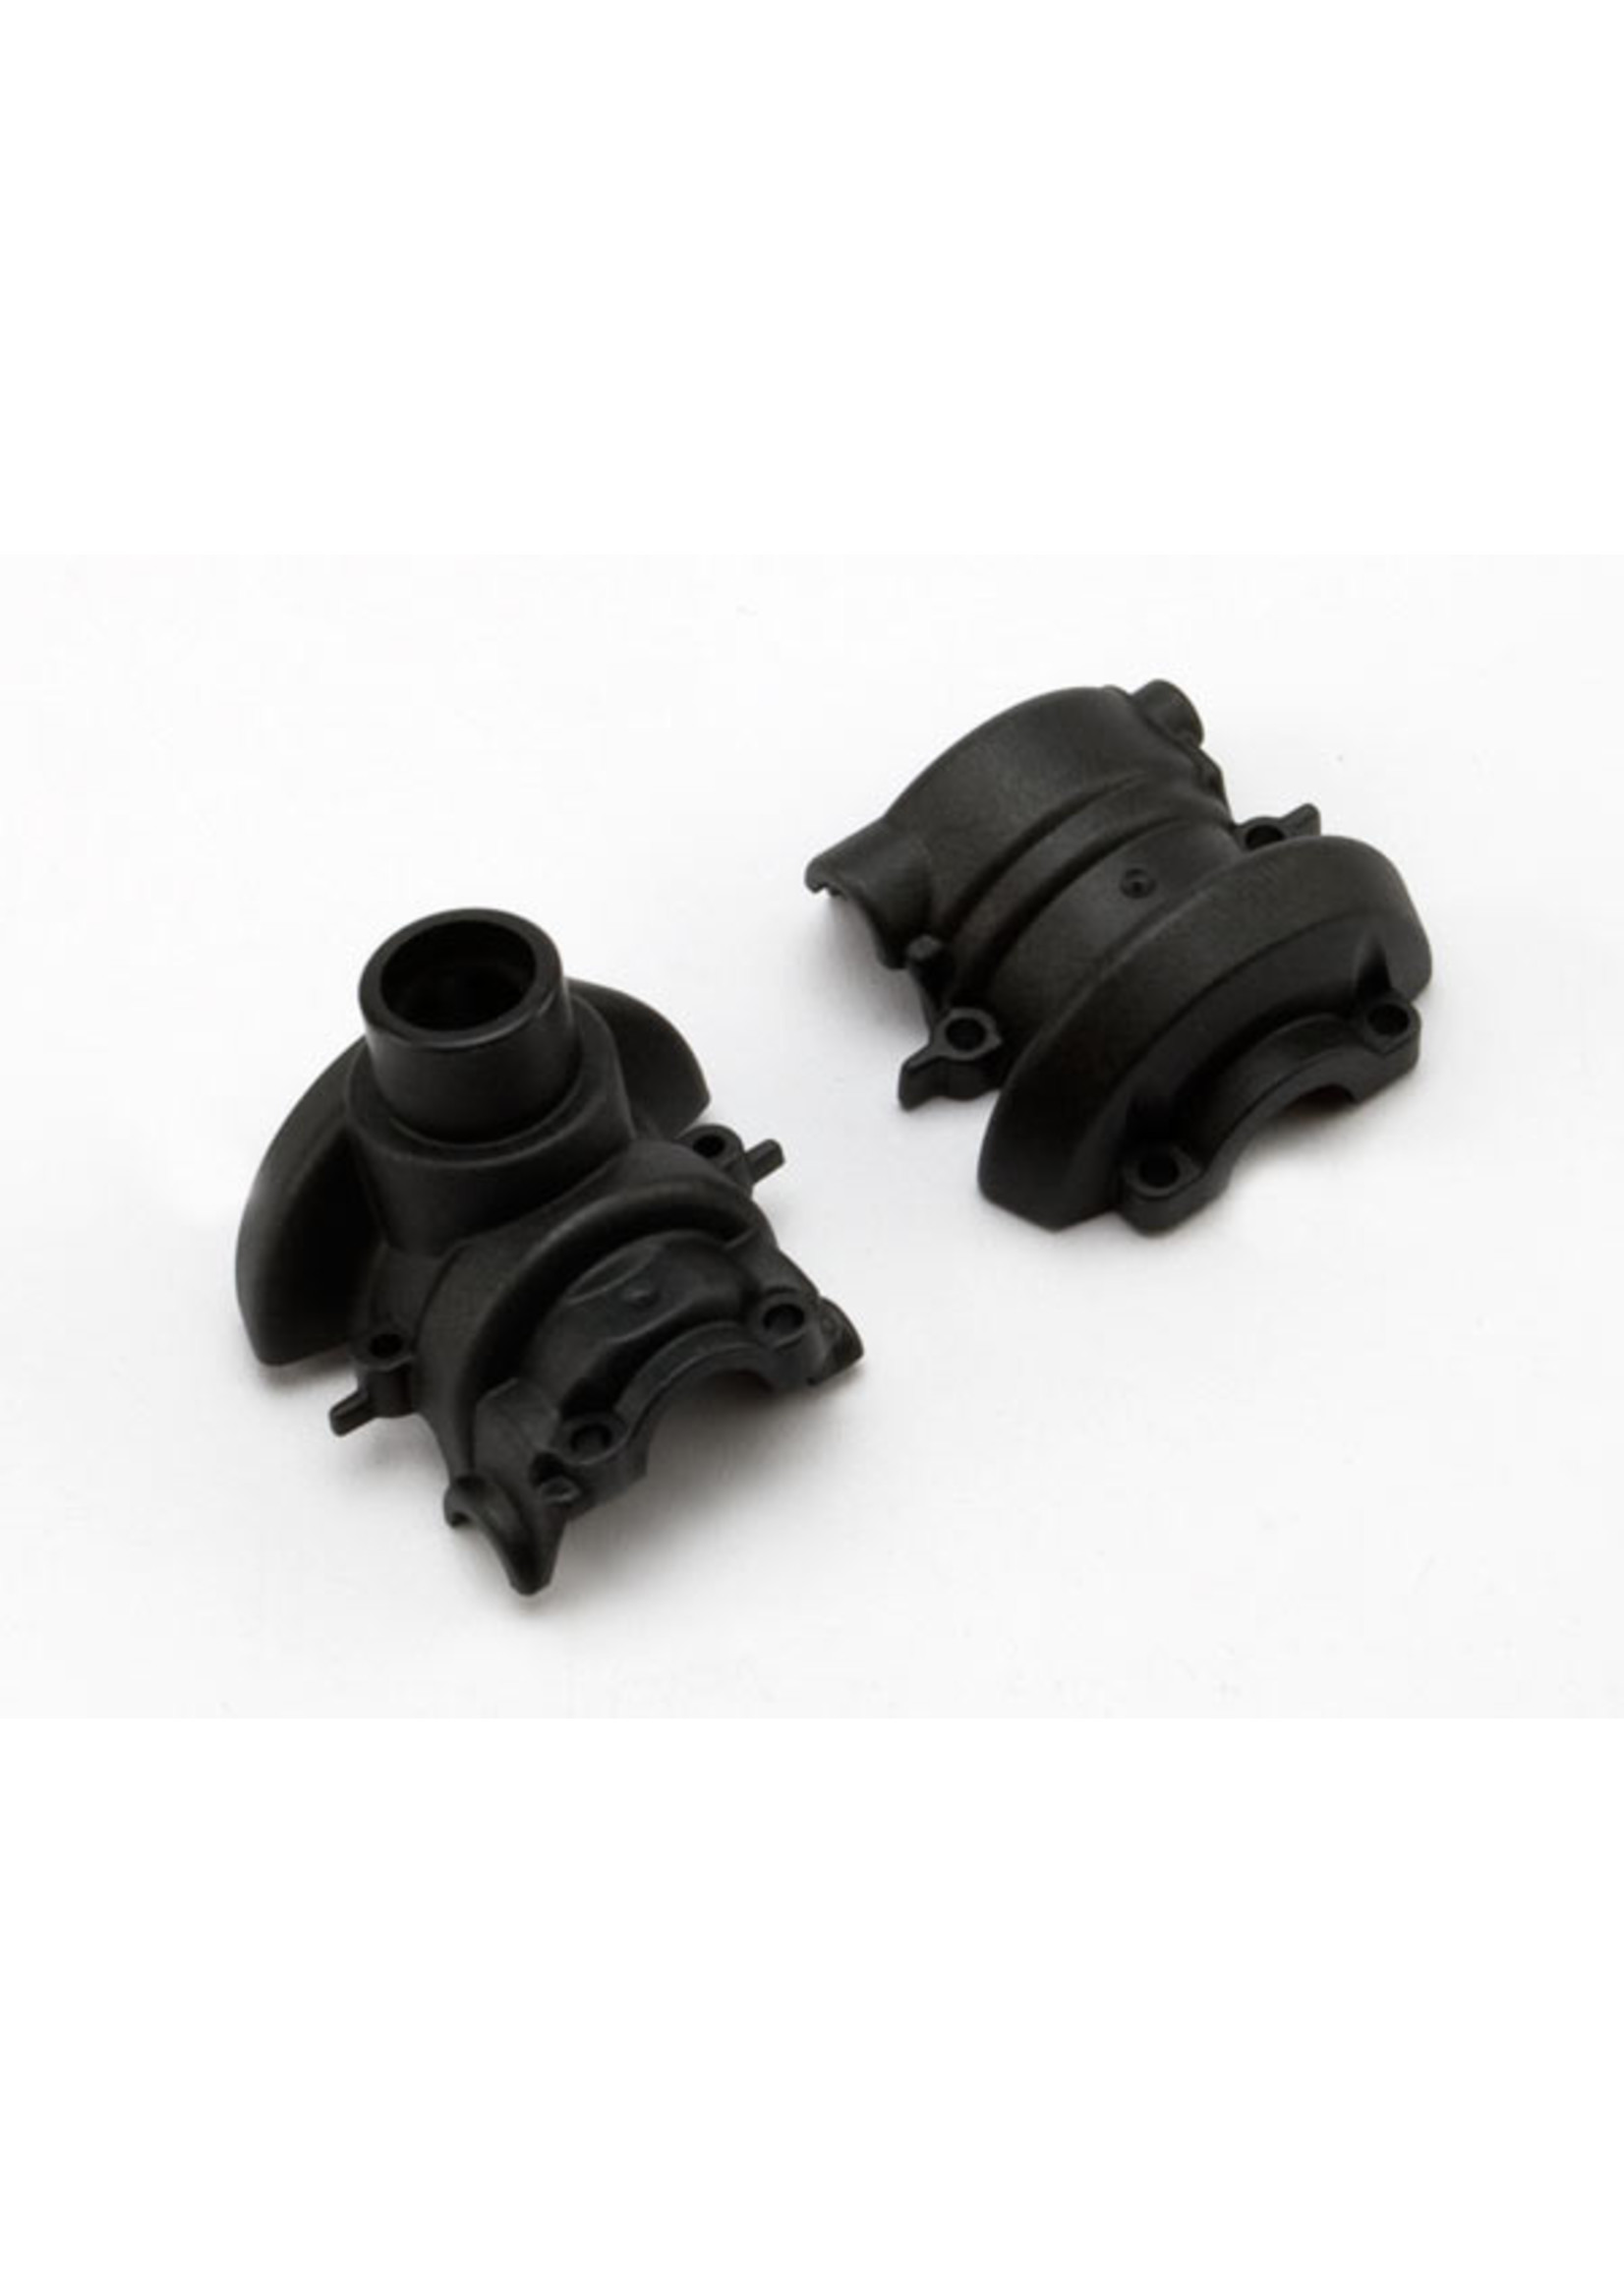 Traxxas 5680 - Housing Differential Front & Rear for Summit